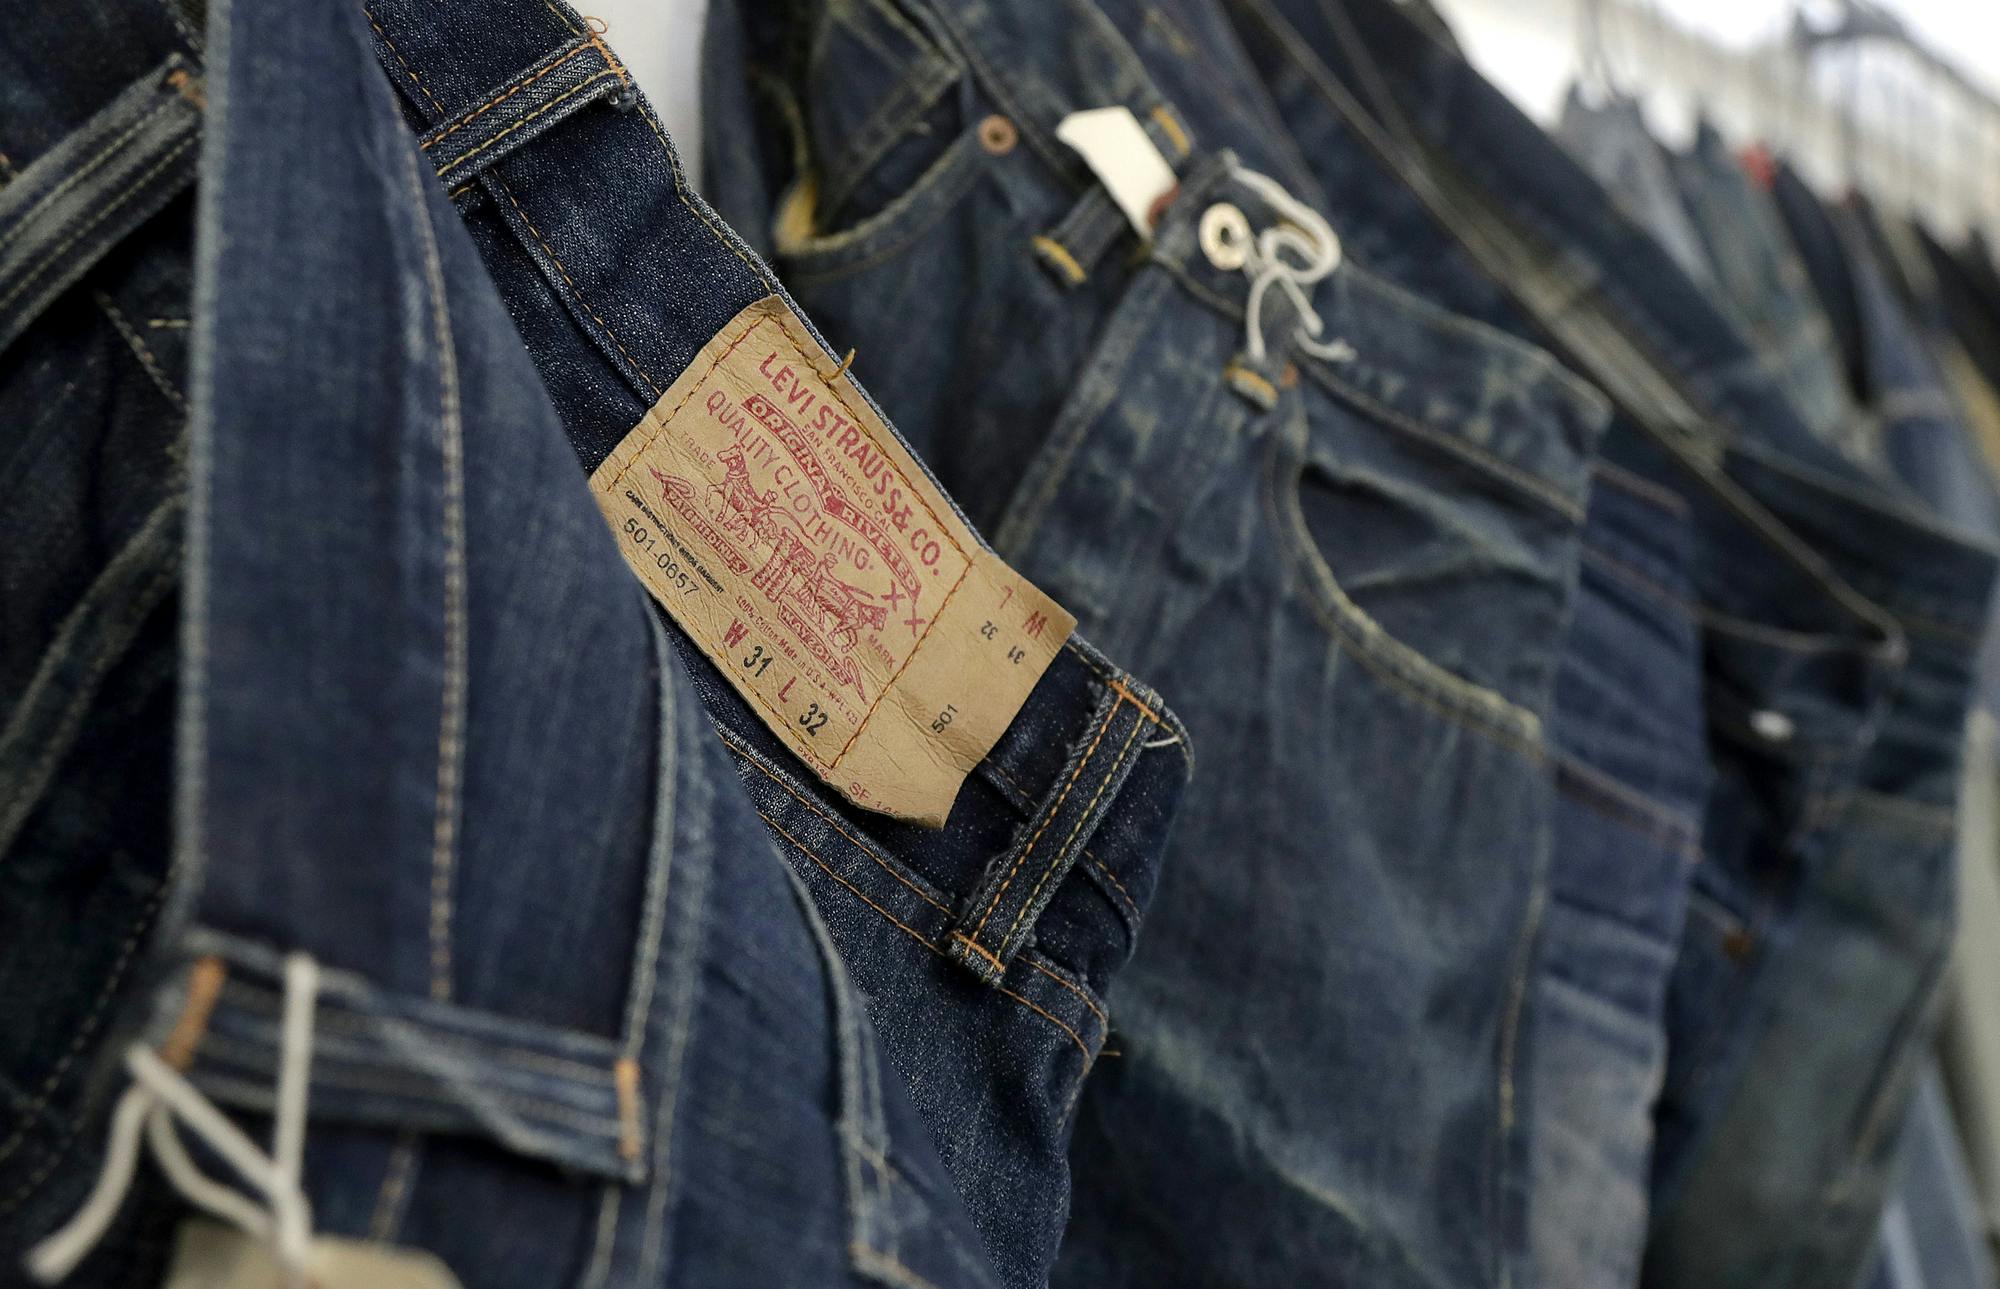 Target to sell Levi's as jeans maker 